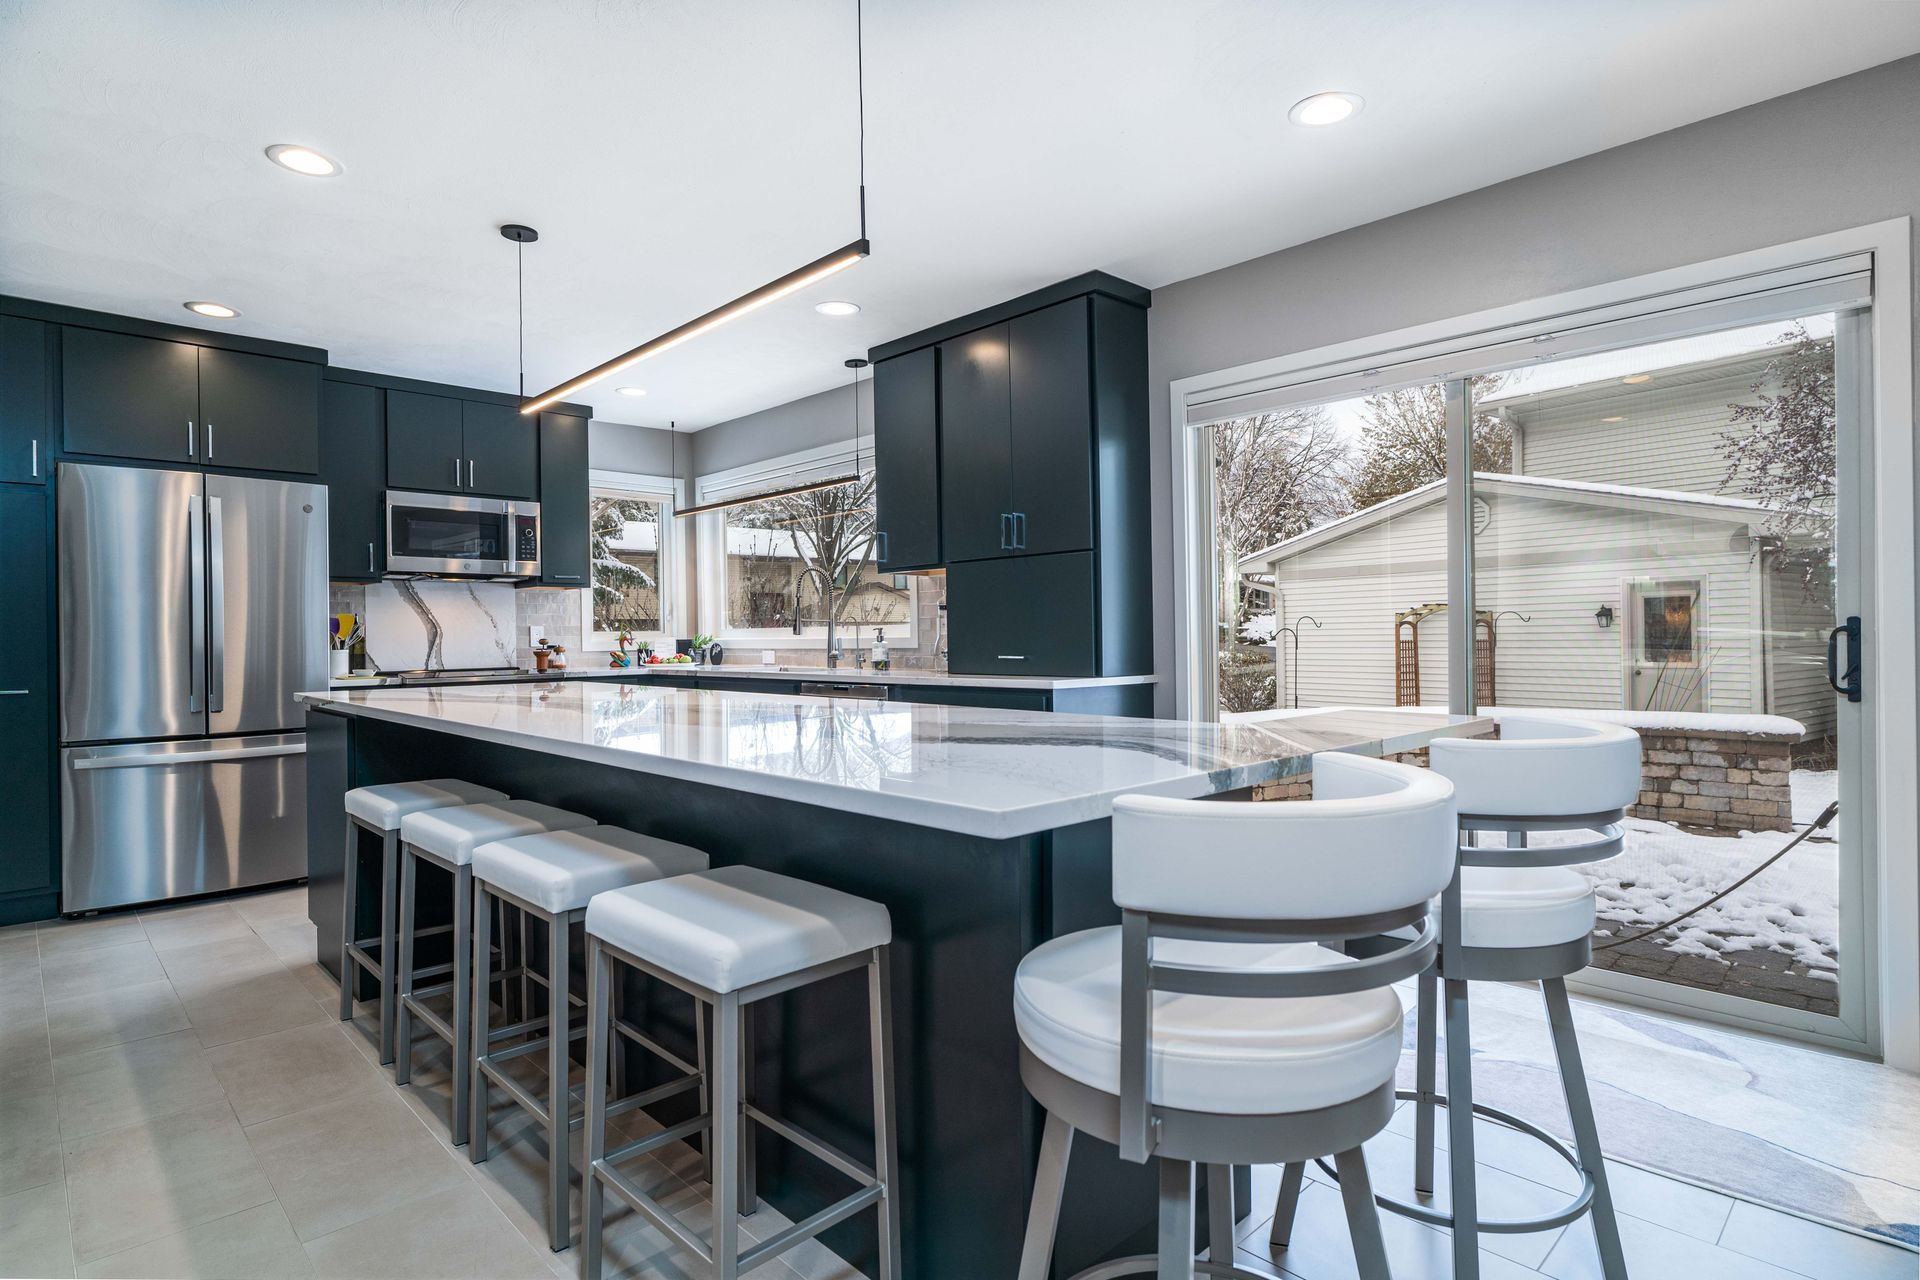 A kitchen with stainless steel appliances and a large island with stools.